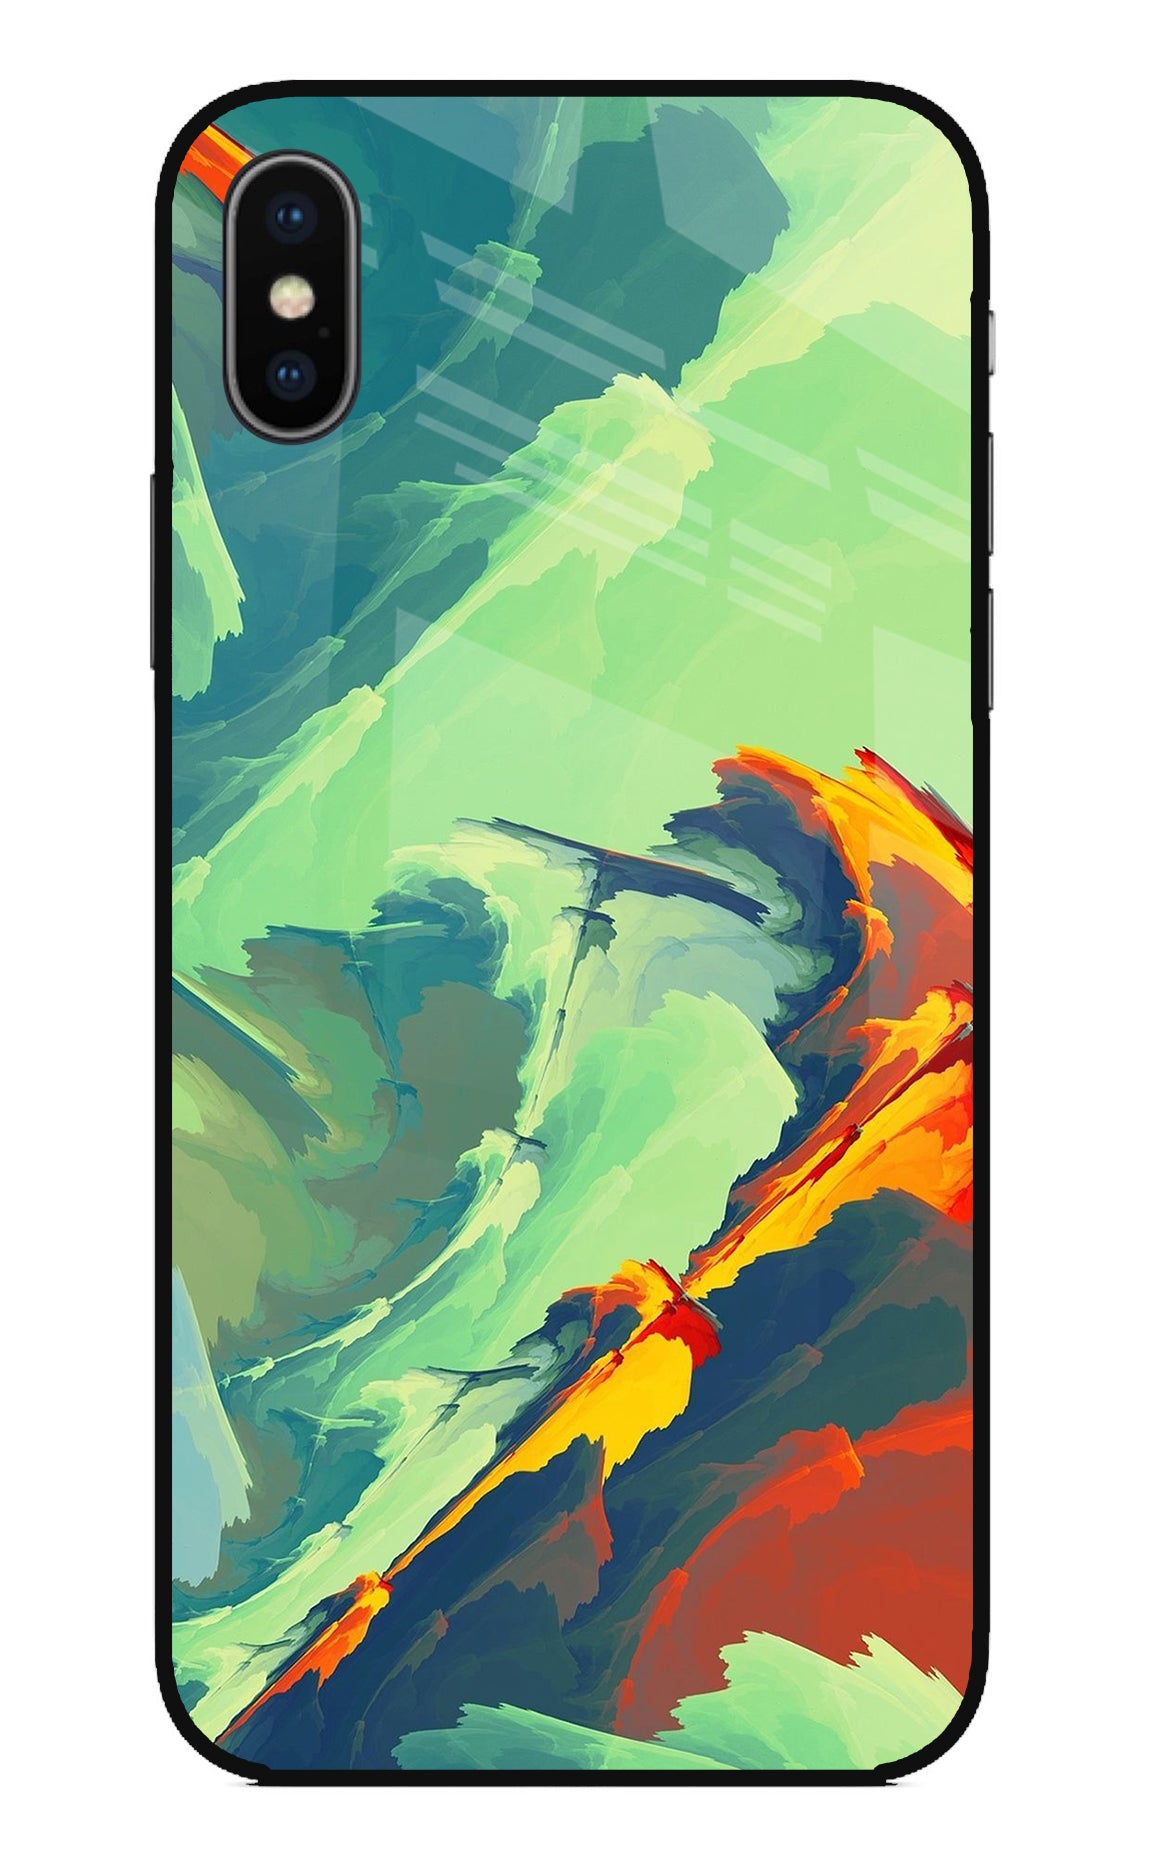 Paint Art iPhone X Back Cover